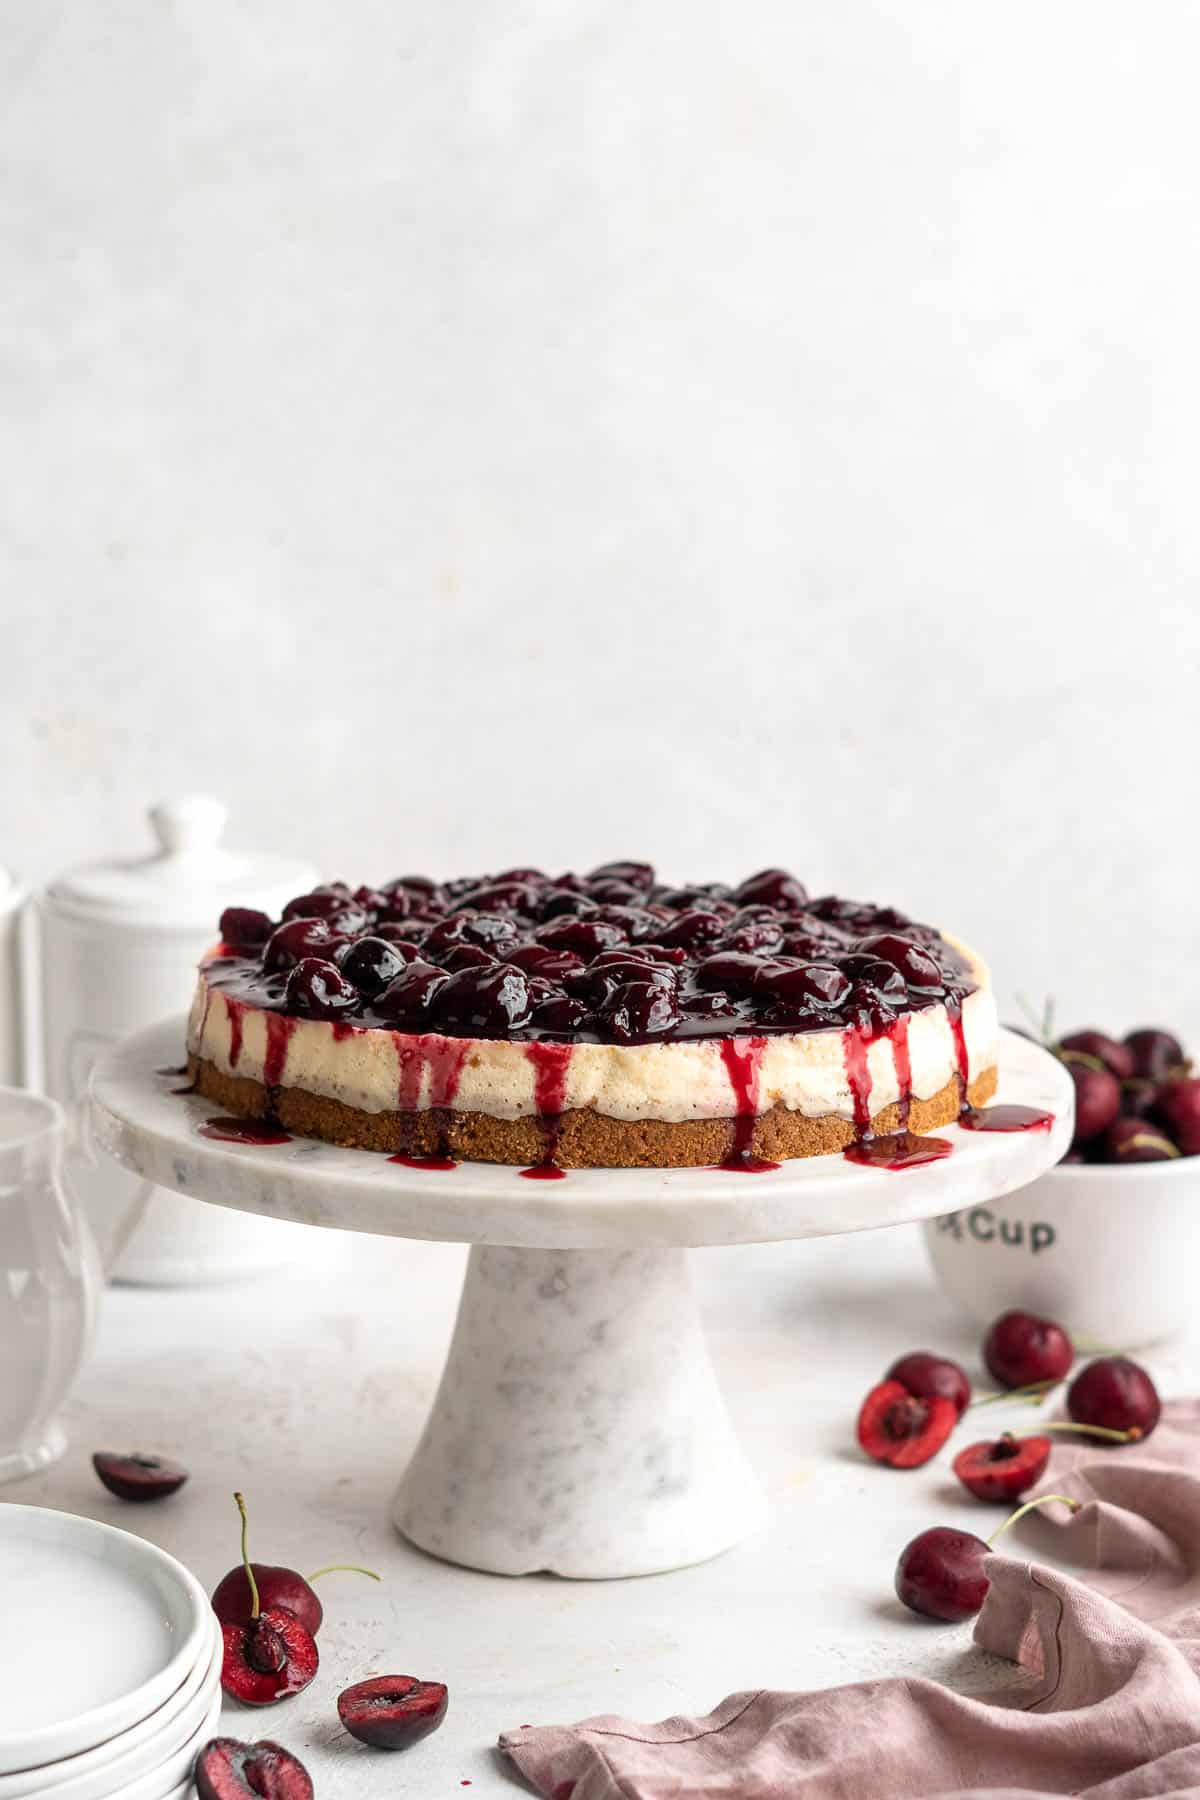 Cherry Cheesecake is lush, velvety, and creamy finished with a heap of sweet homemade cherry sauce on top. The perfect summer dessert with cherries! | aheadofthyme.com